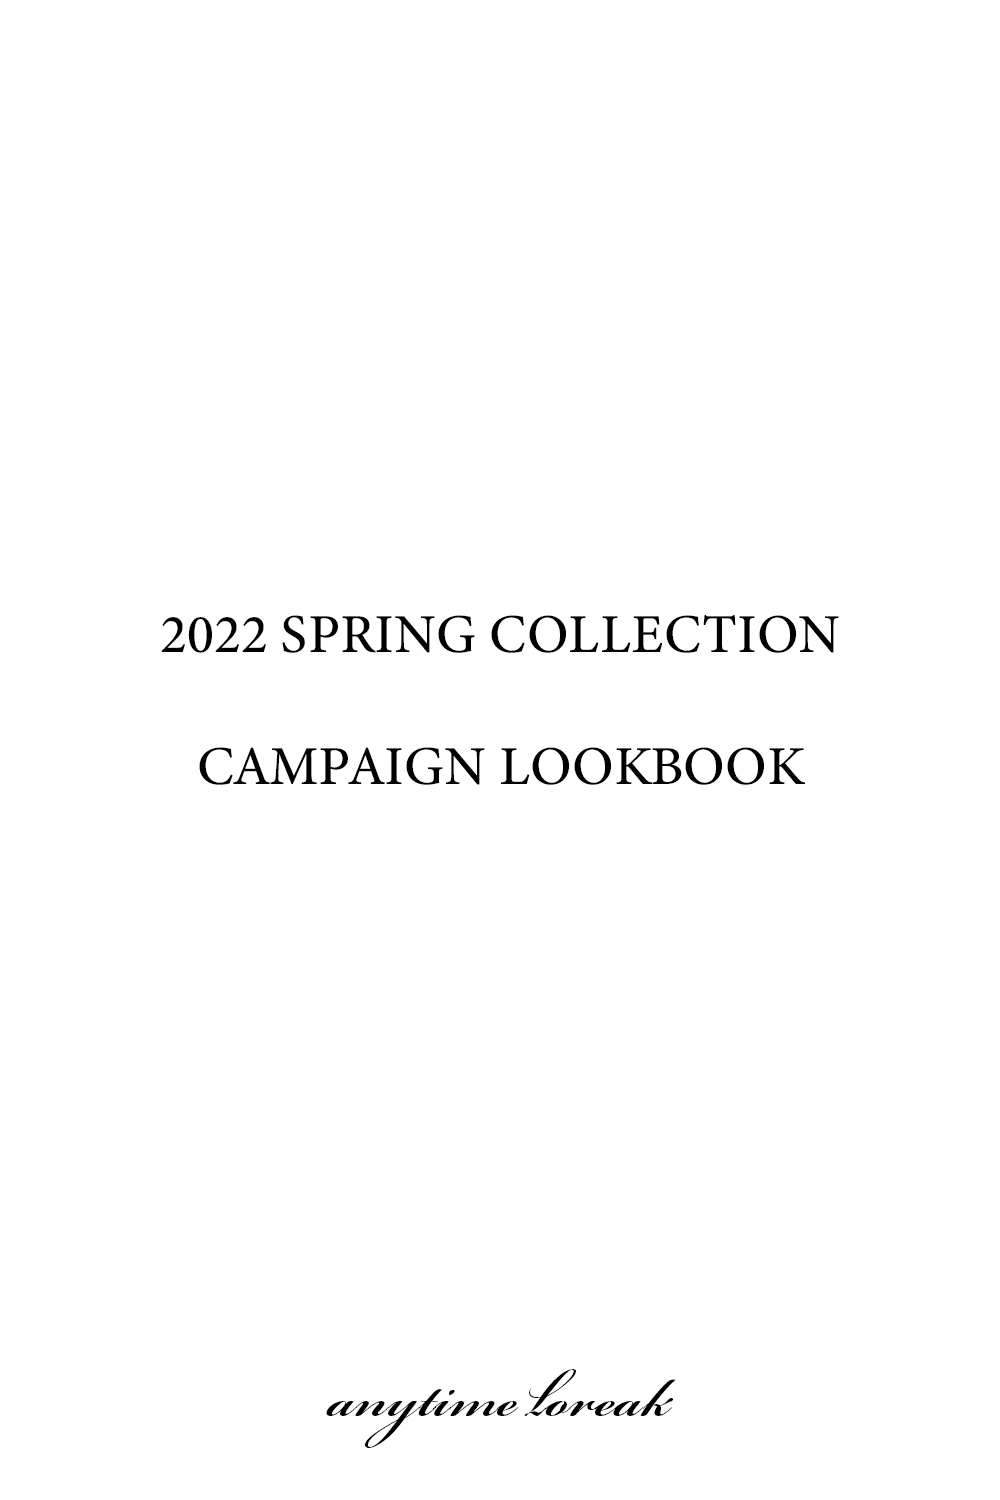 2022 S/S COLLECTION CAMPAIGN LOOKBOOK